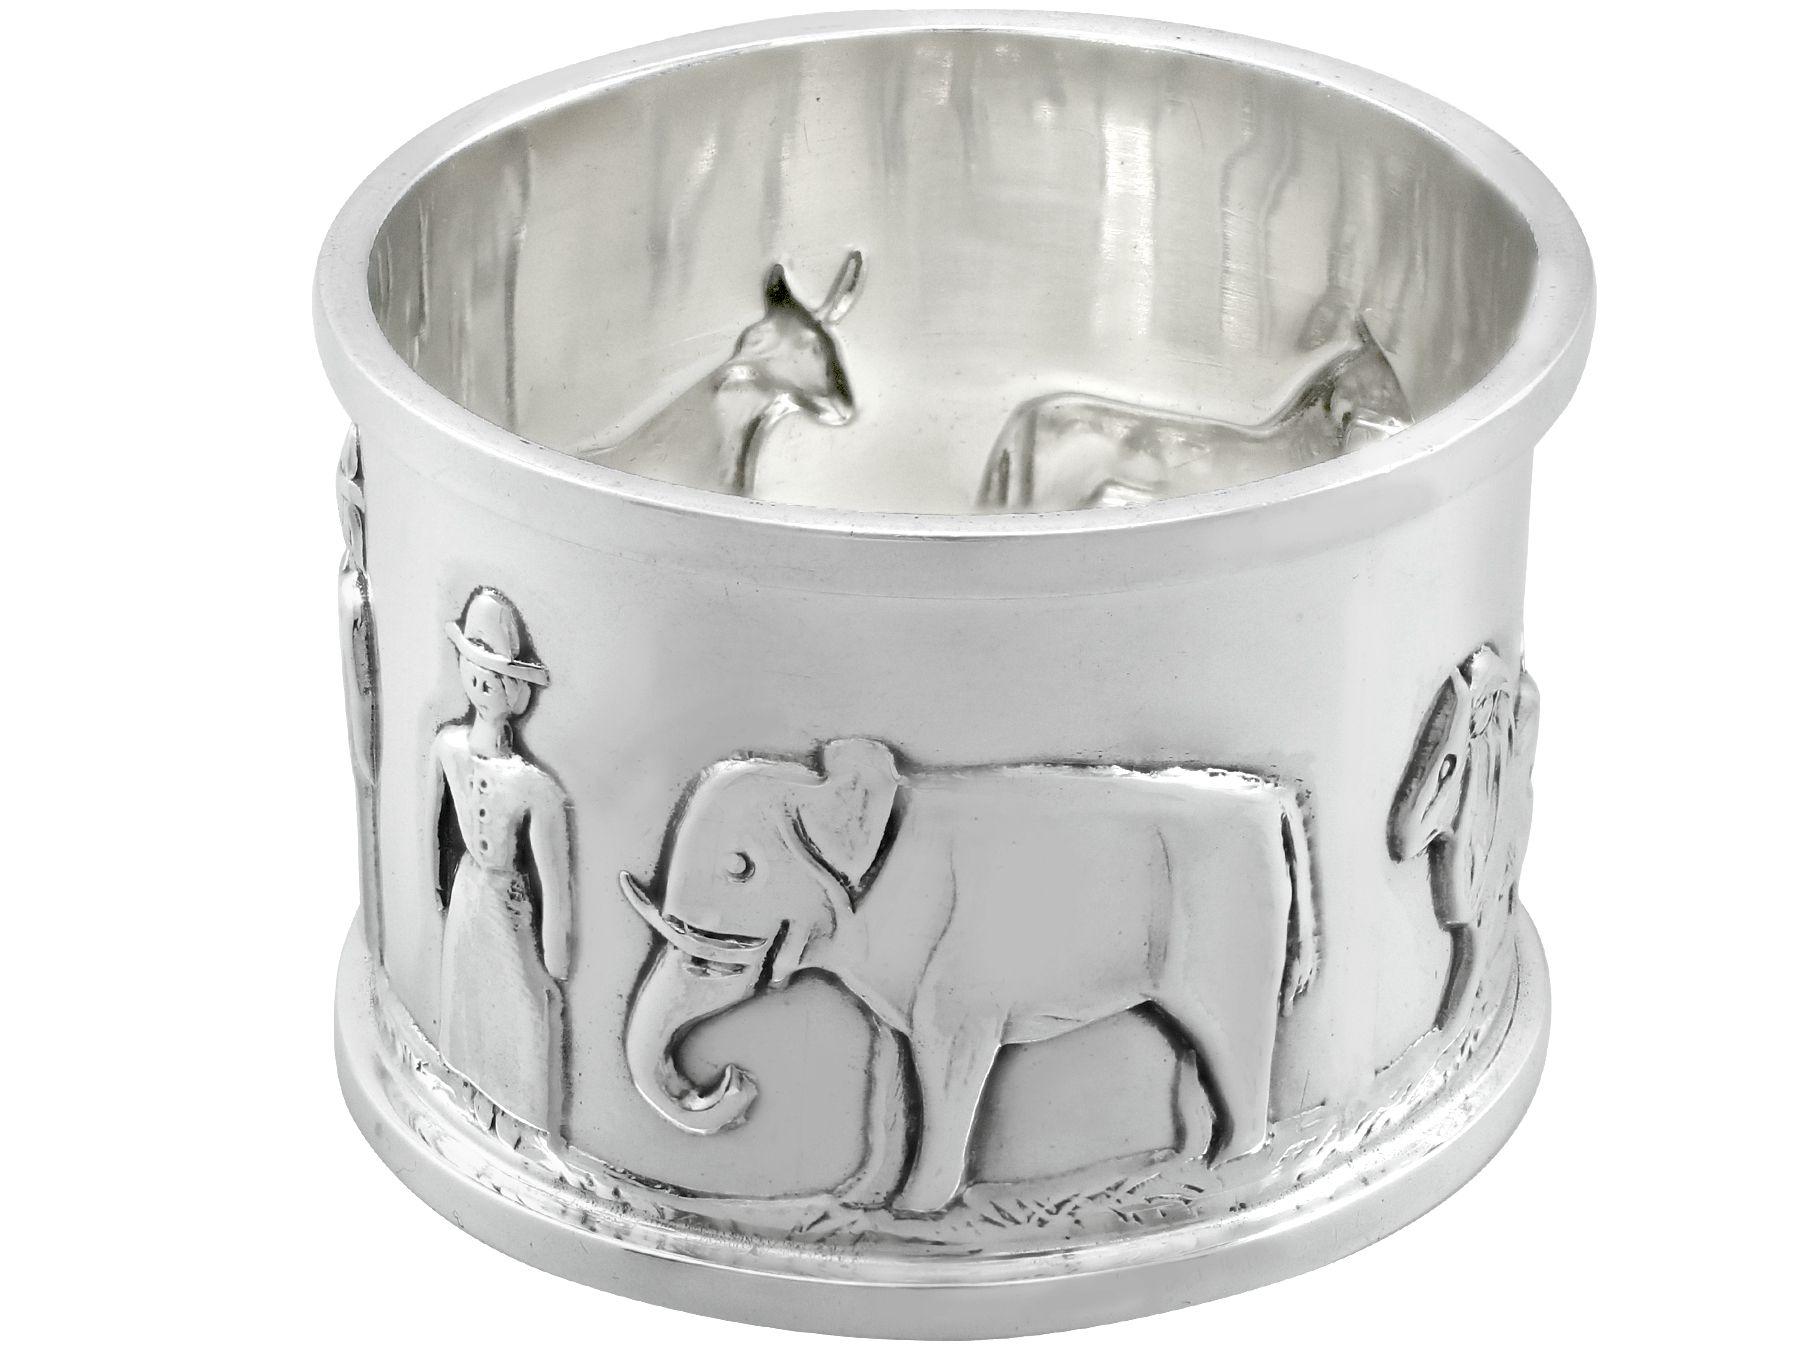 An exceptional, fine and impressive antique George V English sterling silver napkin ring; an addition to our christening silverware collection

This exceptional antique George V sterling silver napkin ring has a cylindrical form.

The surface of